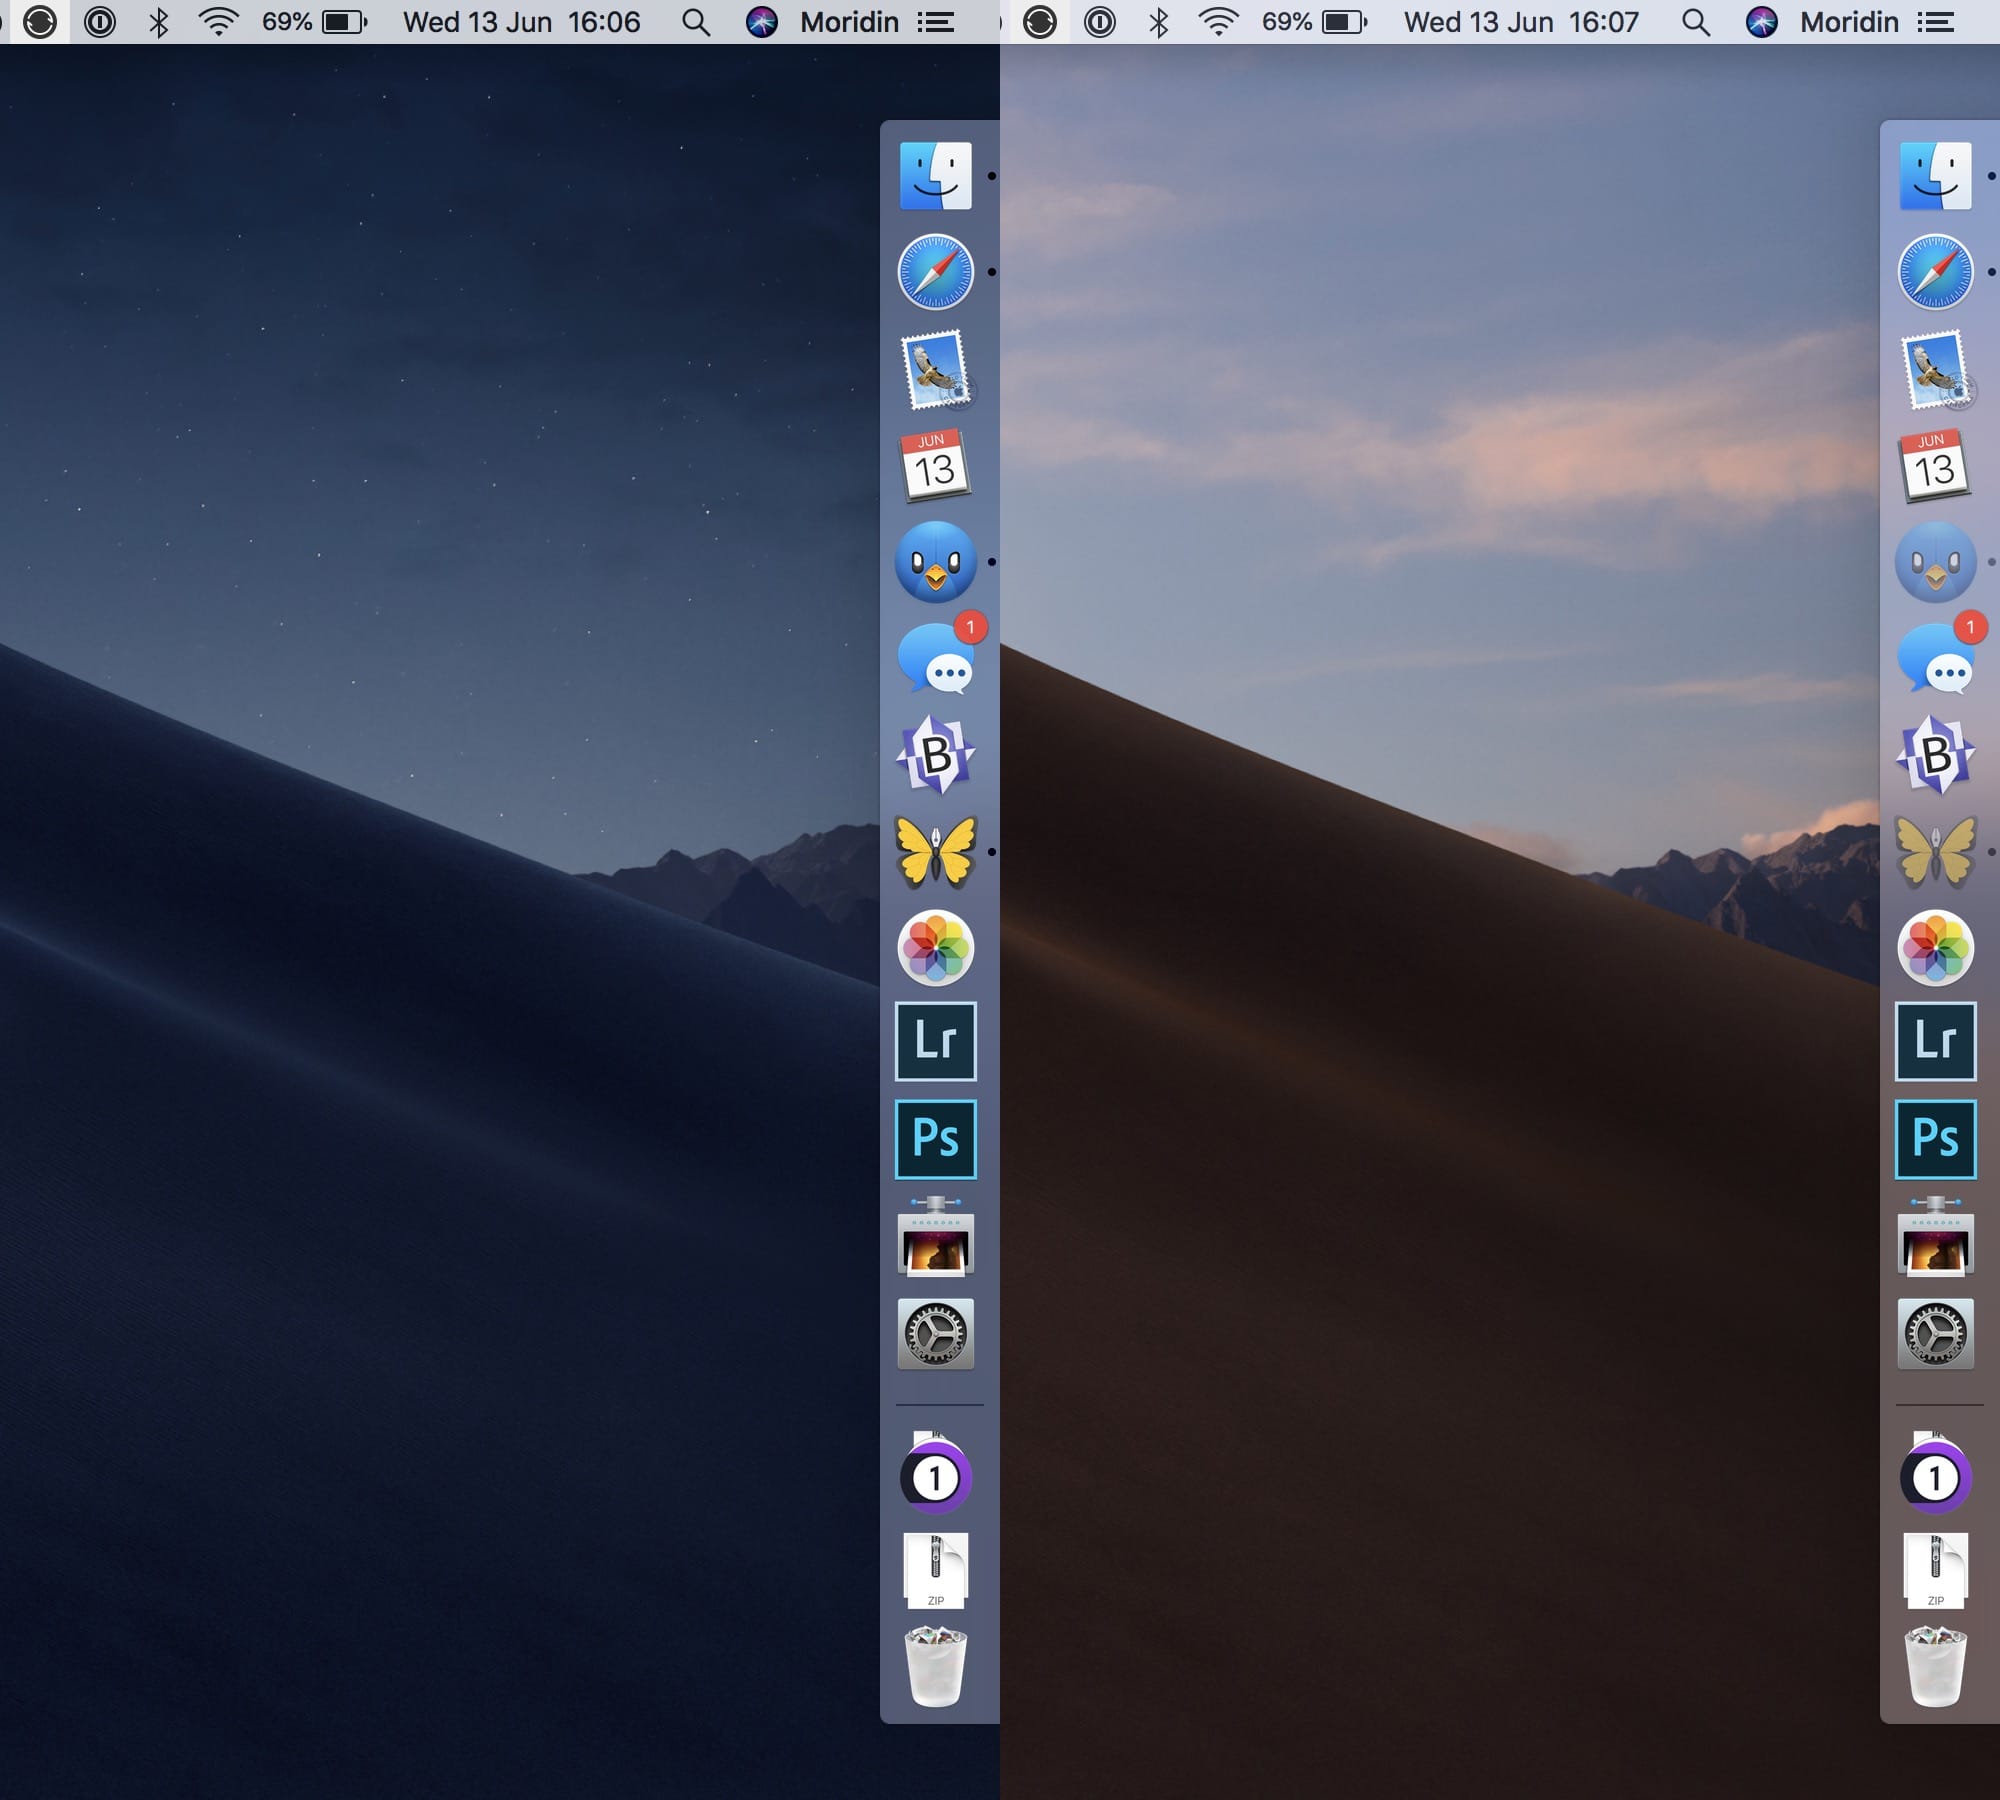 how to enable transparency in dock for mac os x